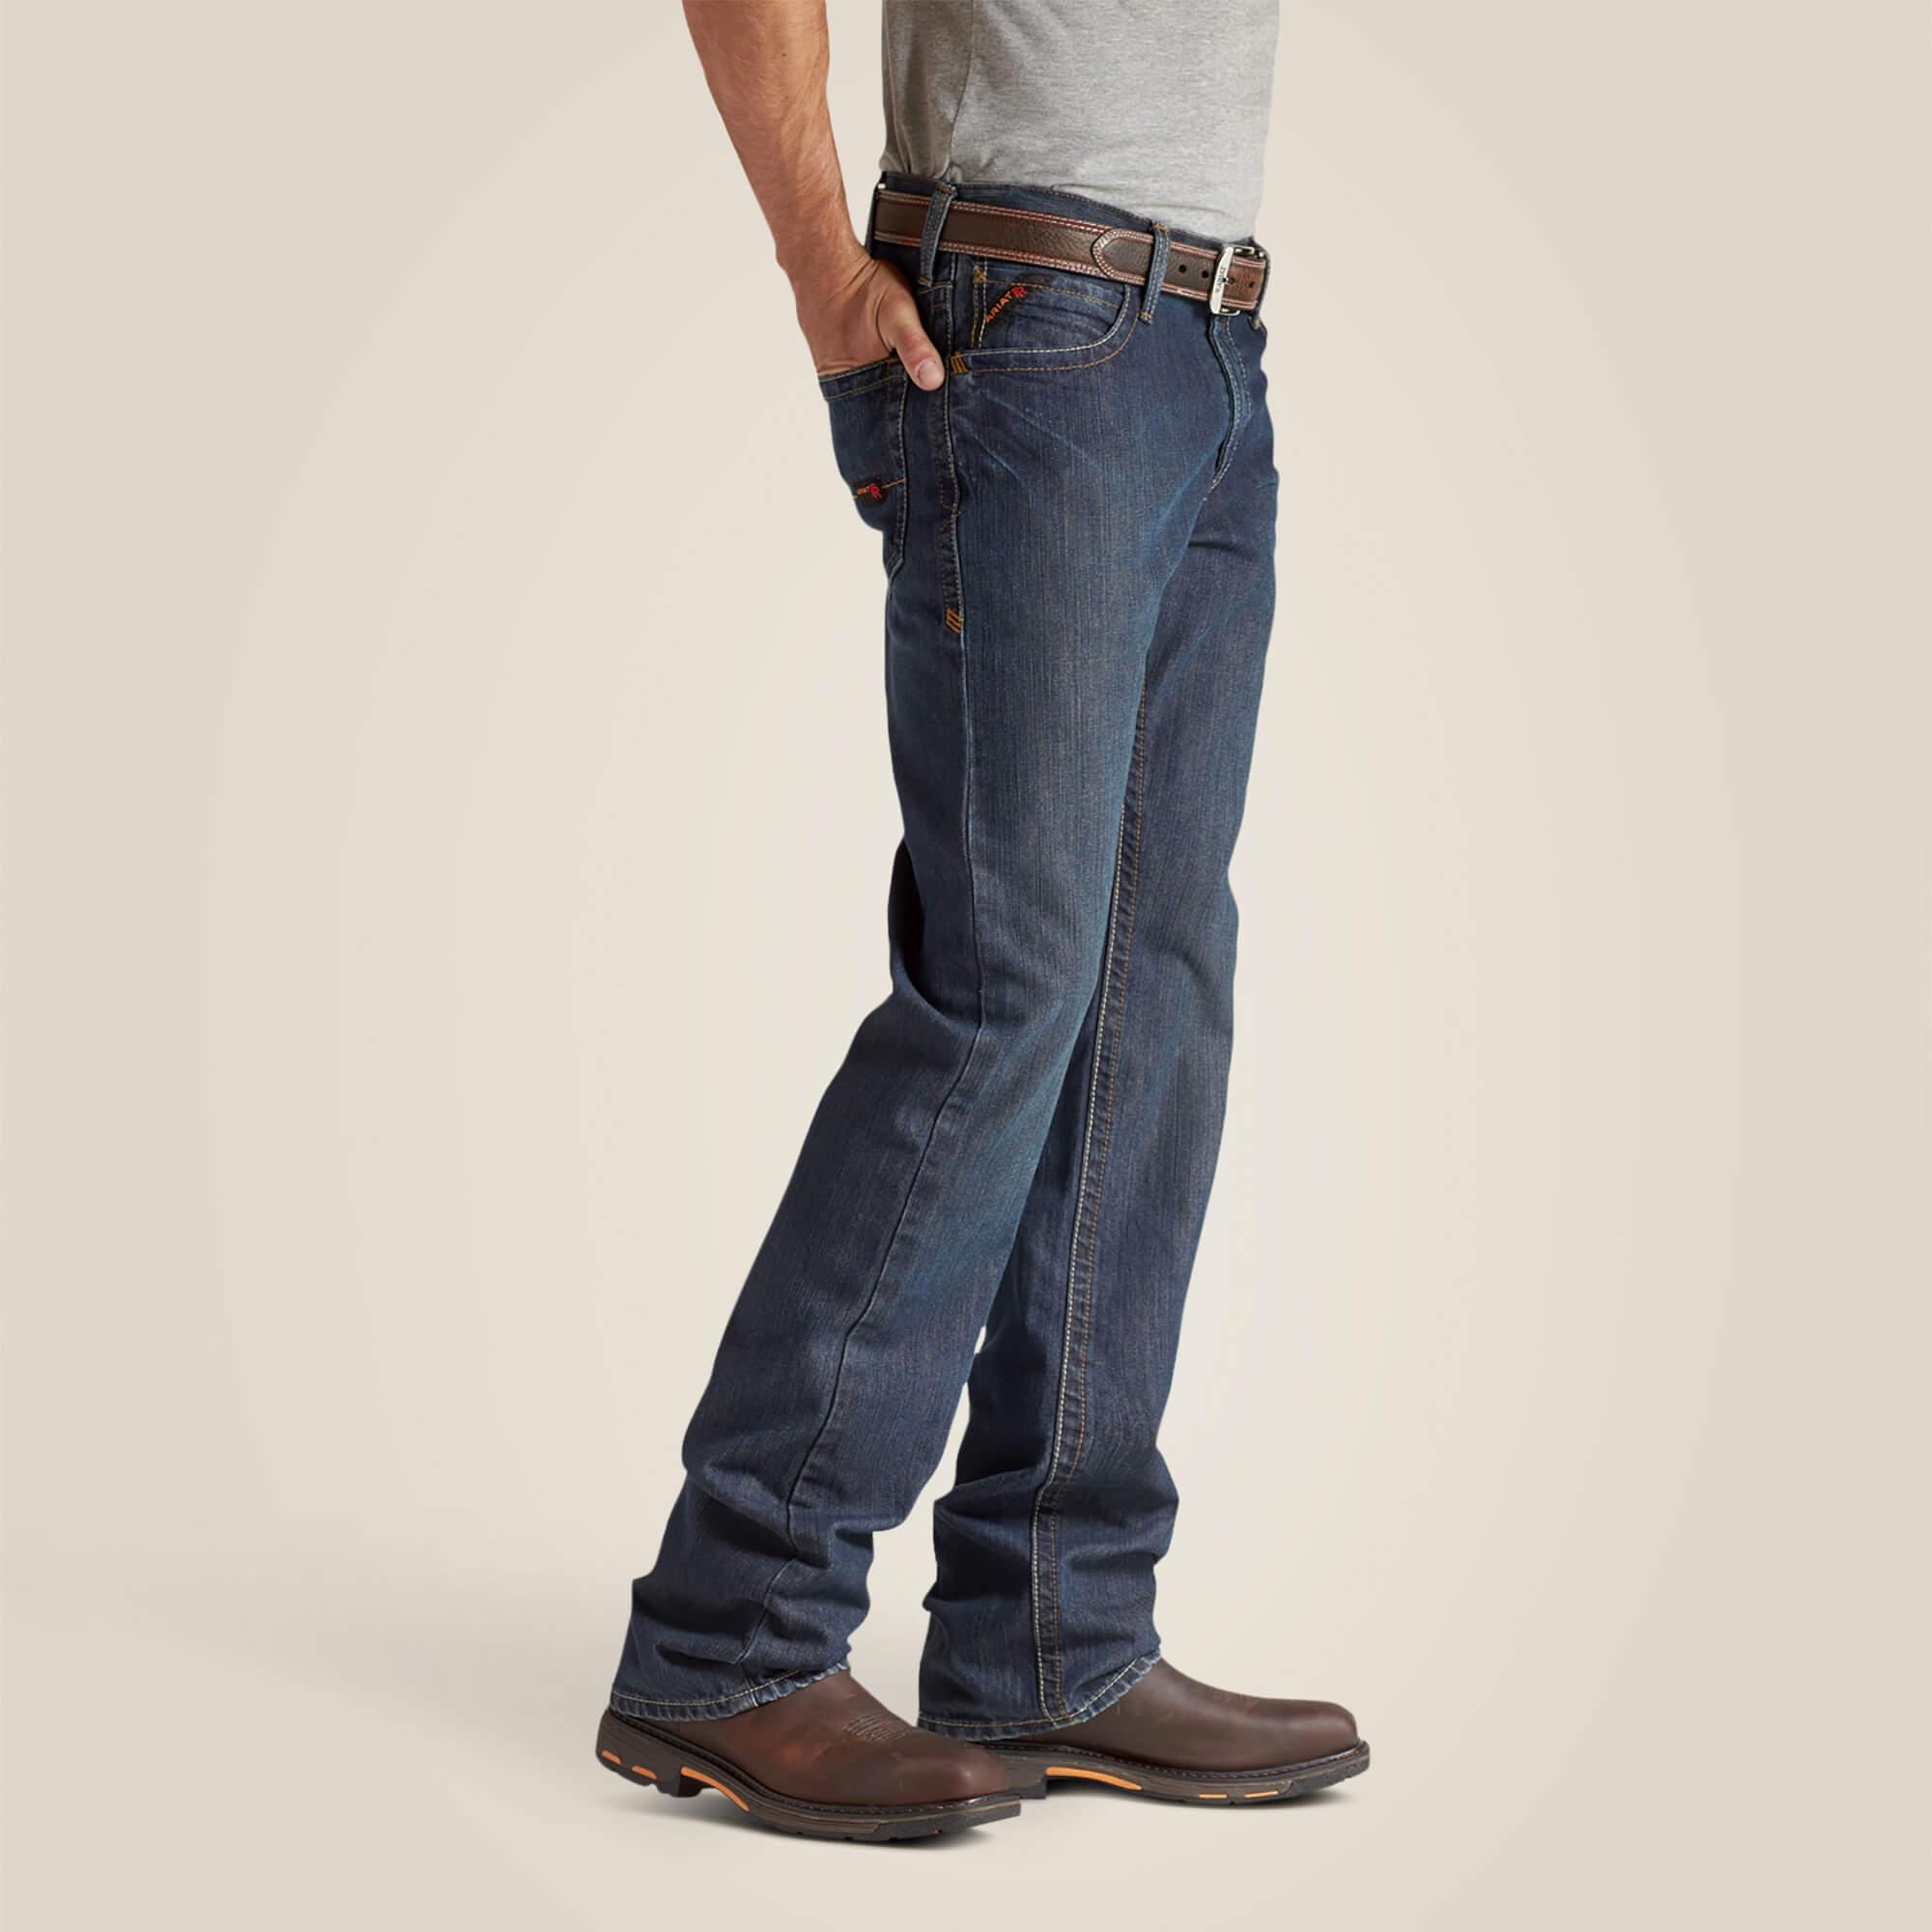 FR M4 Relaxed Basic Boot Cut Jean - Purpose-Built / Home of the Trades